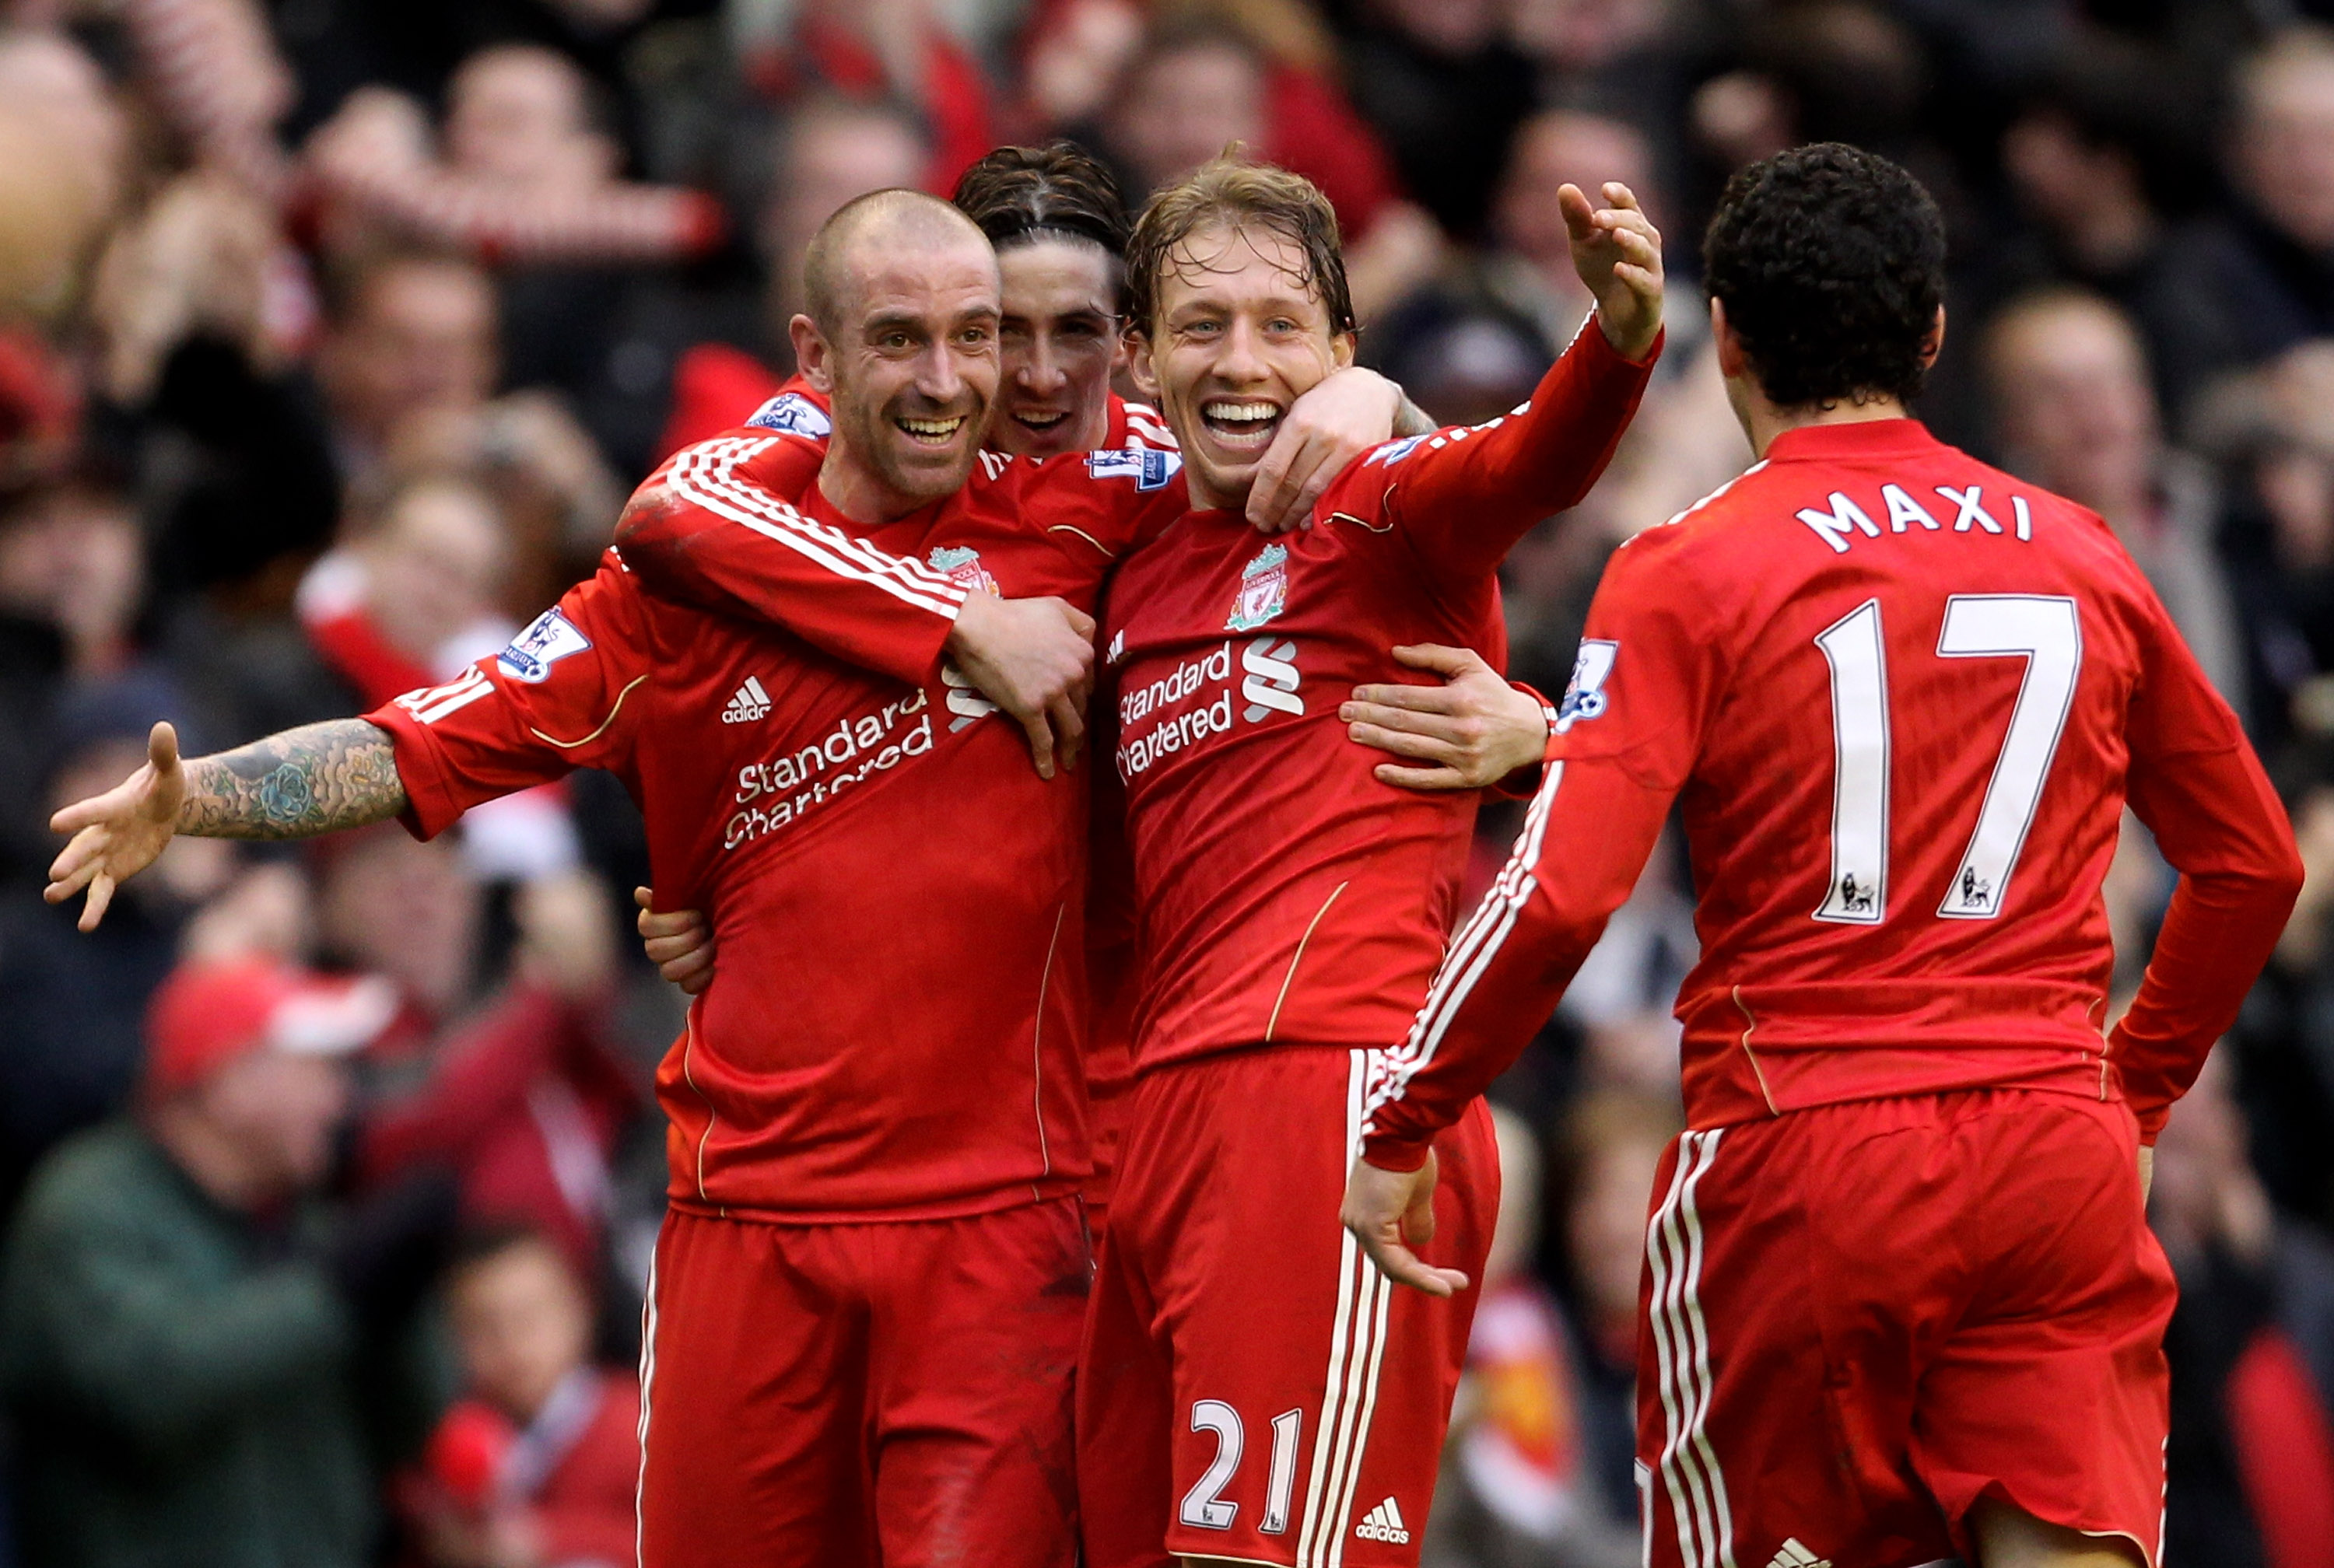 LIVERPOOL, ENGLAND - JANUARY 16:  Raul Meireles of Liverpool (L) celebrates scoring the opening goal with team mates Lucas, Maxi Rodriguez and Fernando Torres during the Barclays Premier League match between Liverpool and Everton at Anfield on January 16,